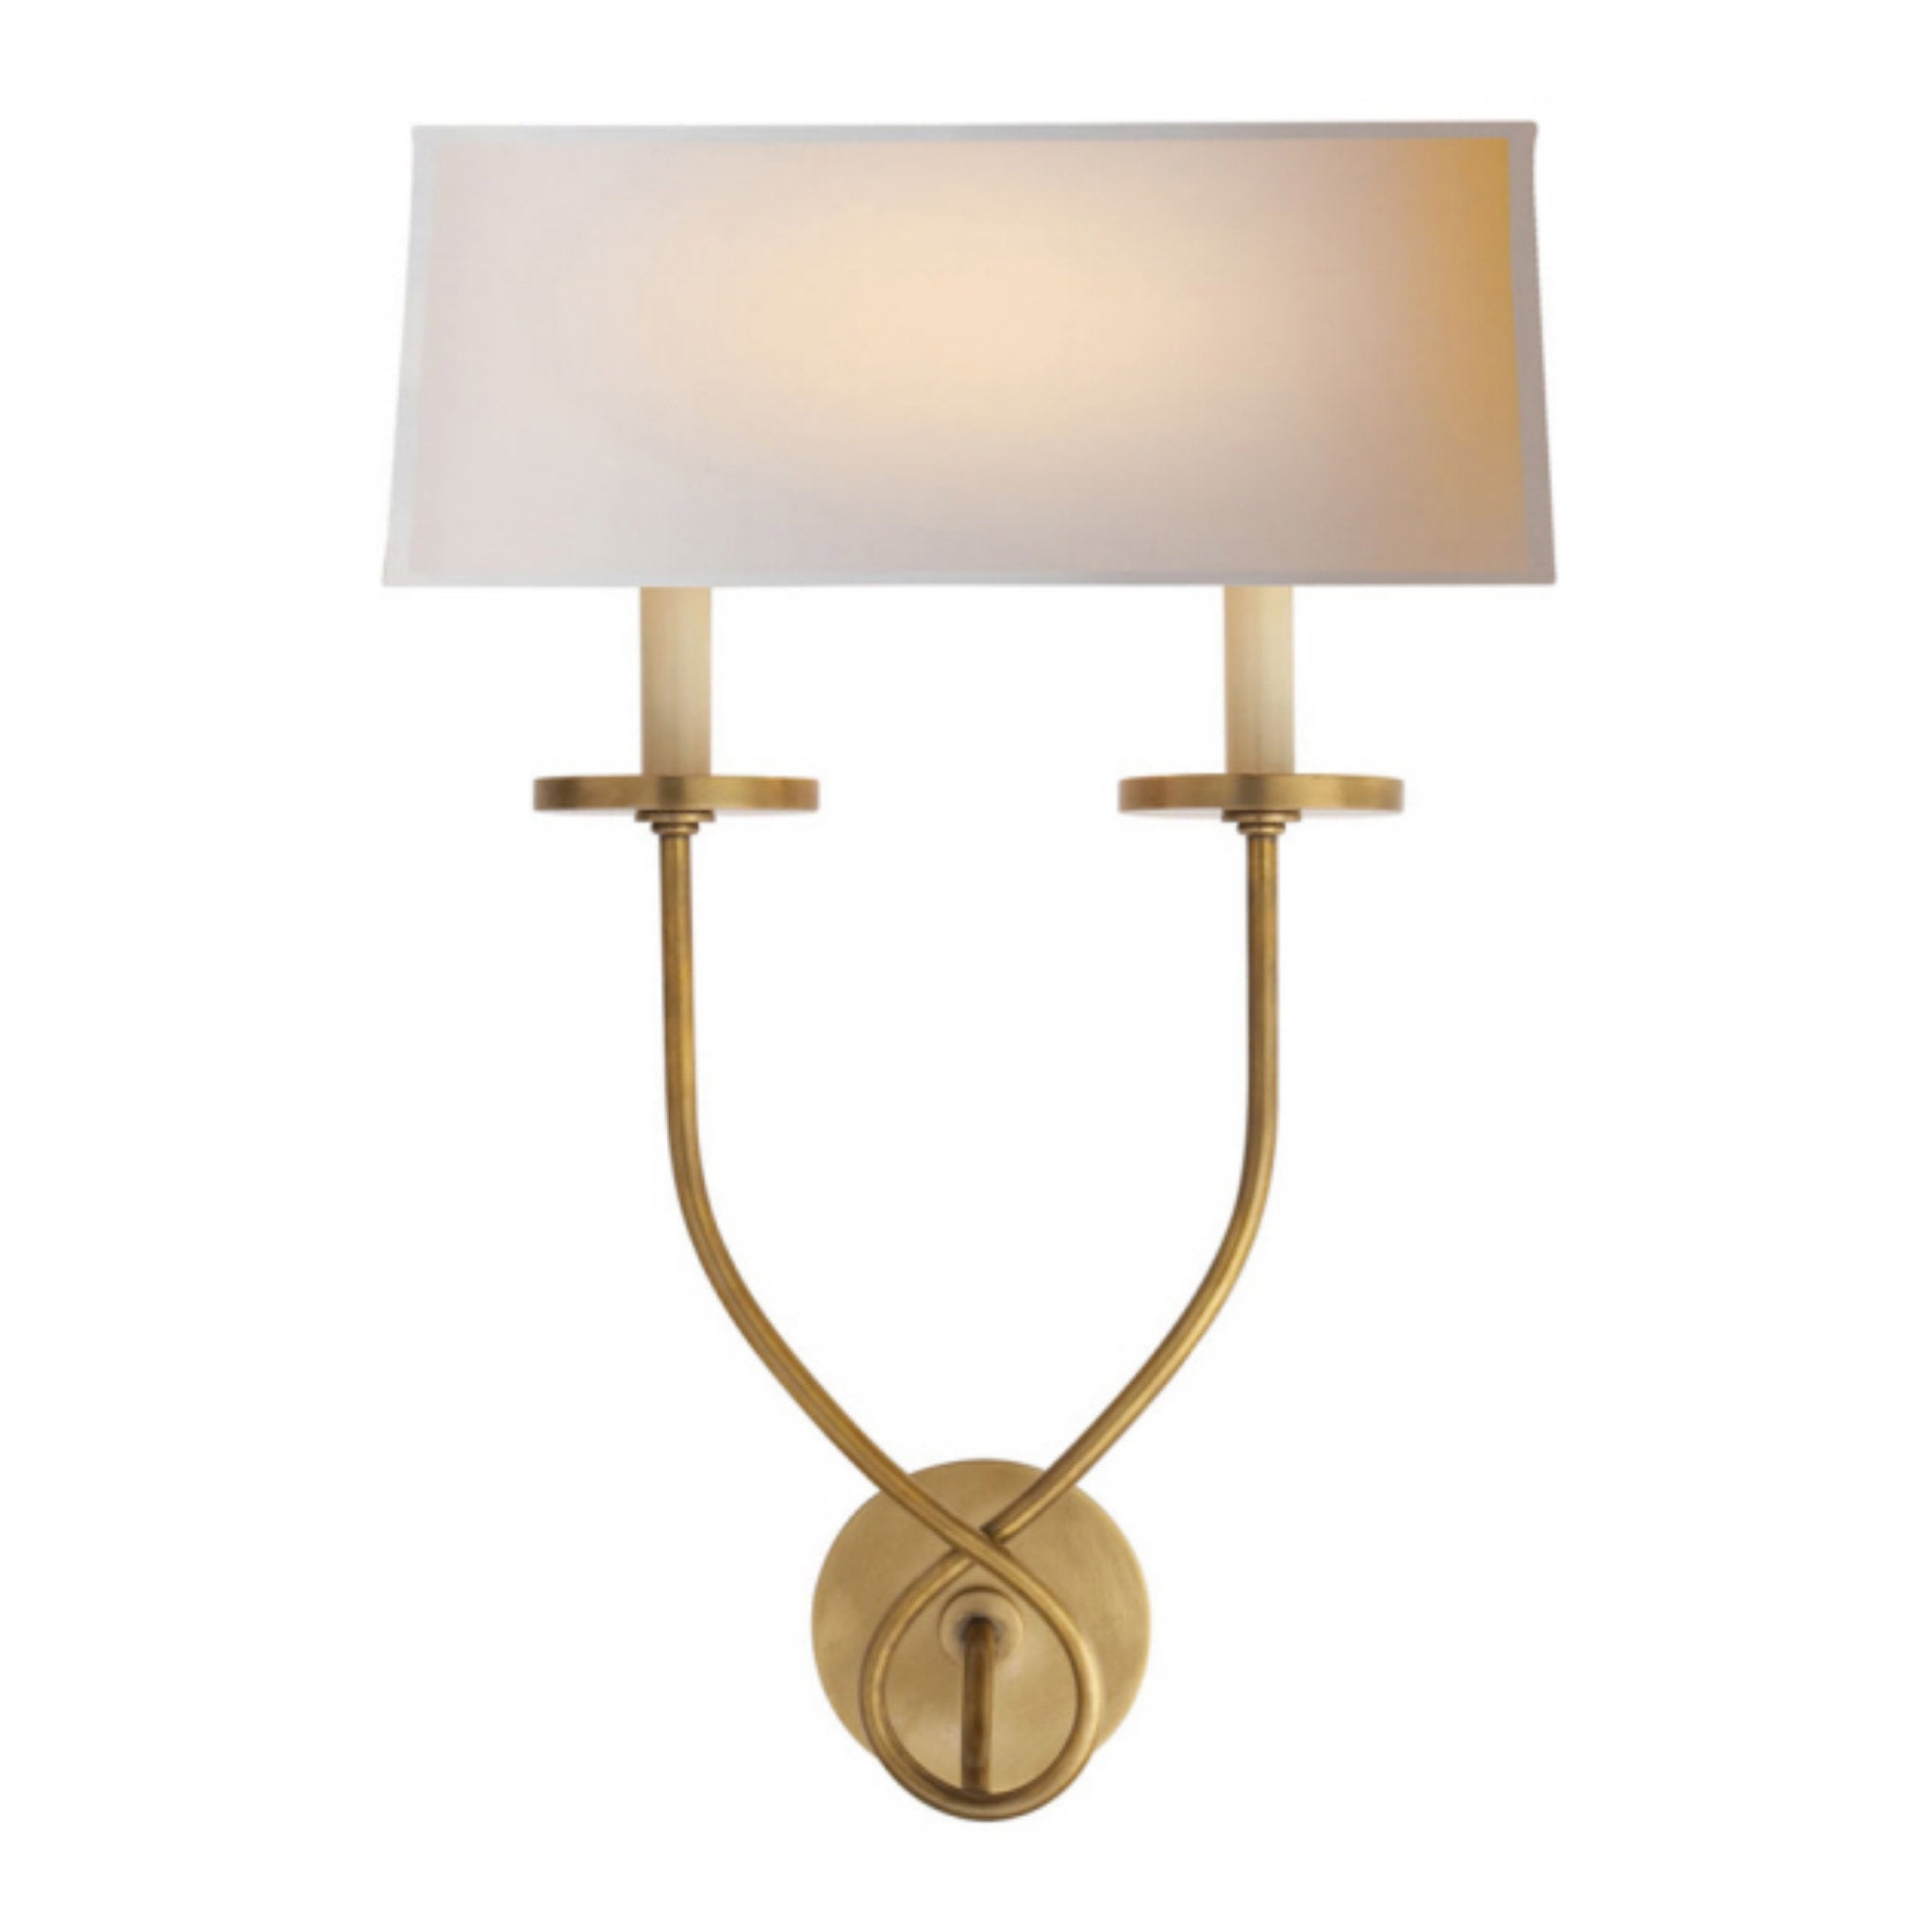 Chapman & Myers Symmetric Twist Double Sconce in Antique-Burnished Brass with Natural Paper Shade